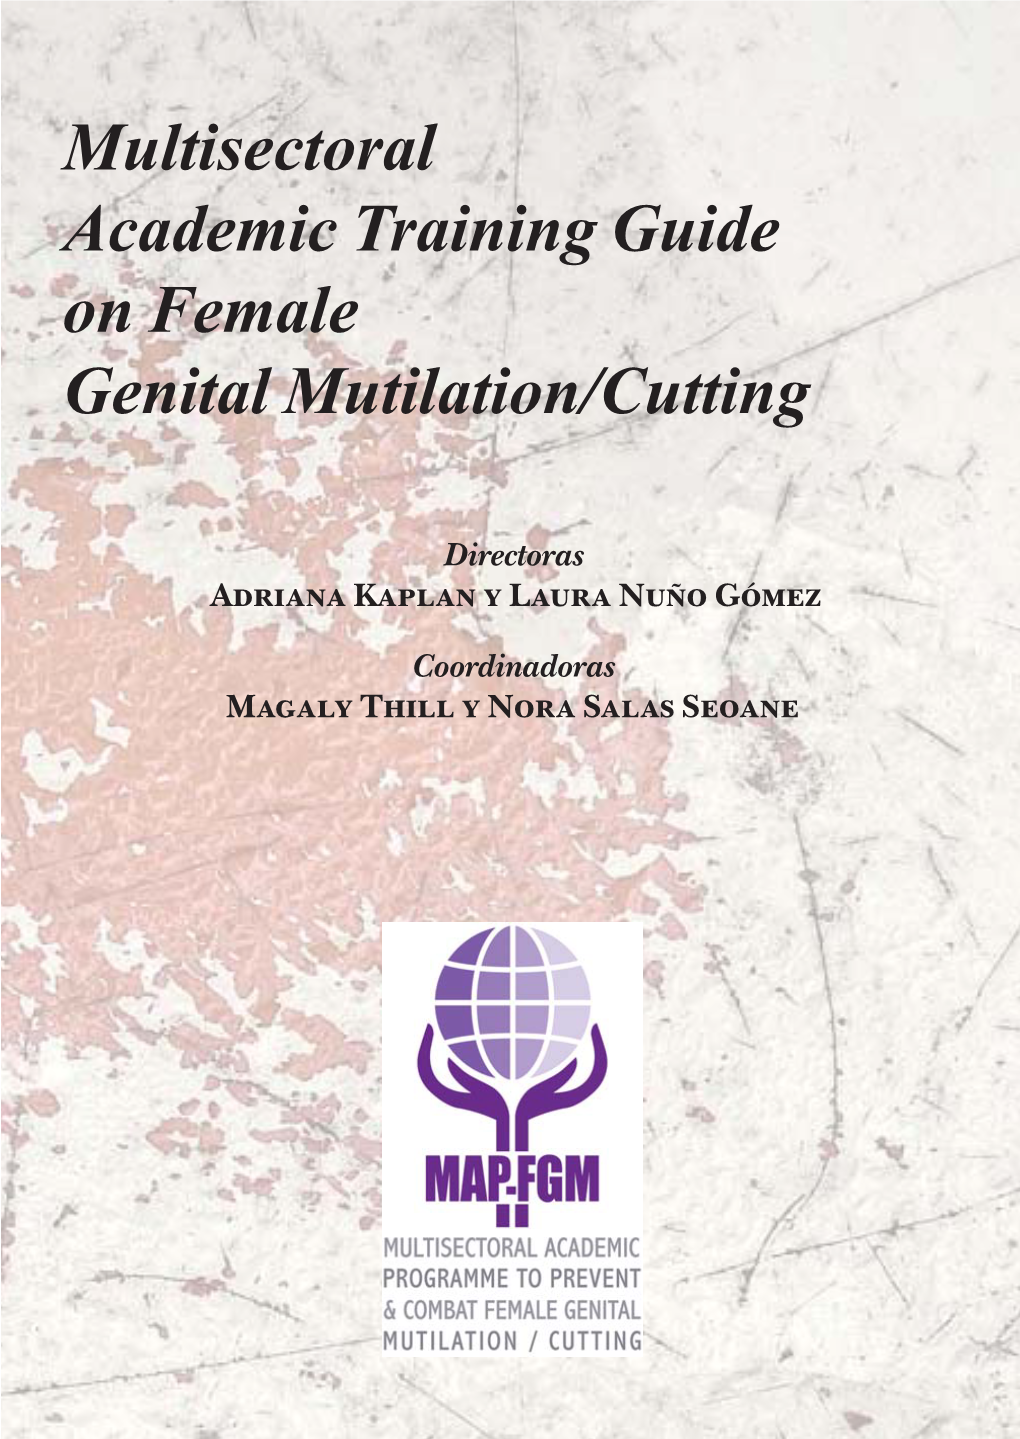 Multisectoral Academic Training Guide on Female Genital Mutilation/Cutting